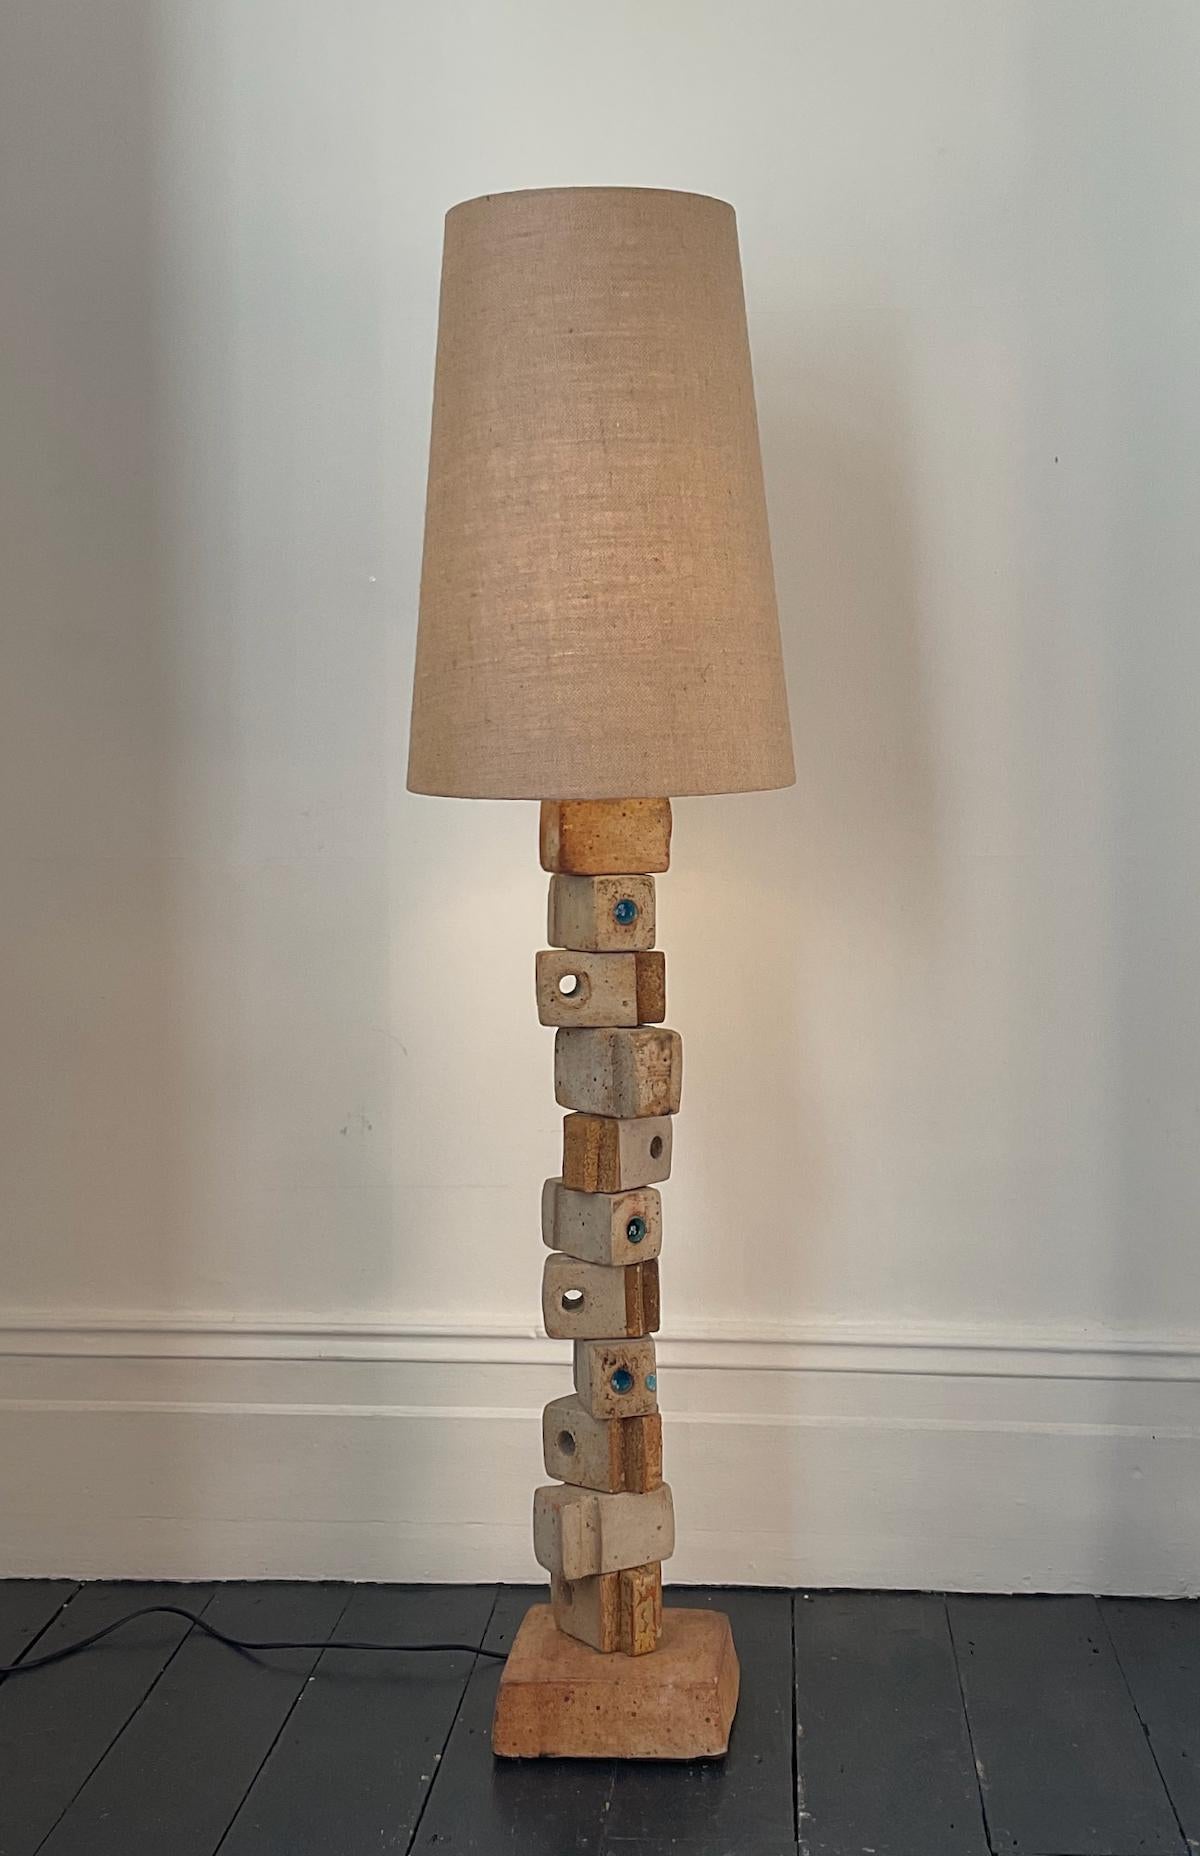 A monumental ceramic TOTEM lamp by Bernard Rooke, mid-20th century England.

A beautiful sculptural piece, made up of ceramic elements in natural tones of terracotta and stone. A very unusual model with rectangular blocks - some pierced, others